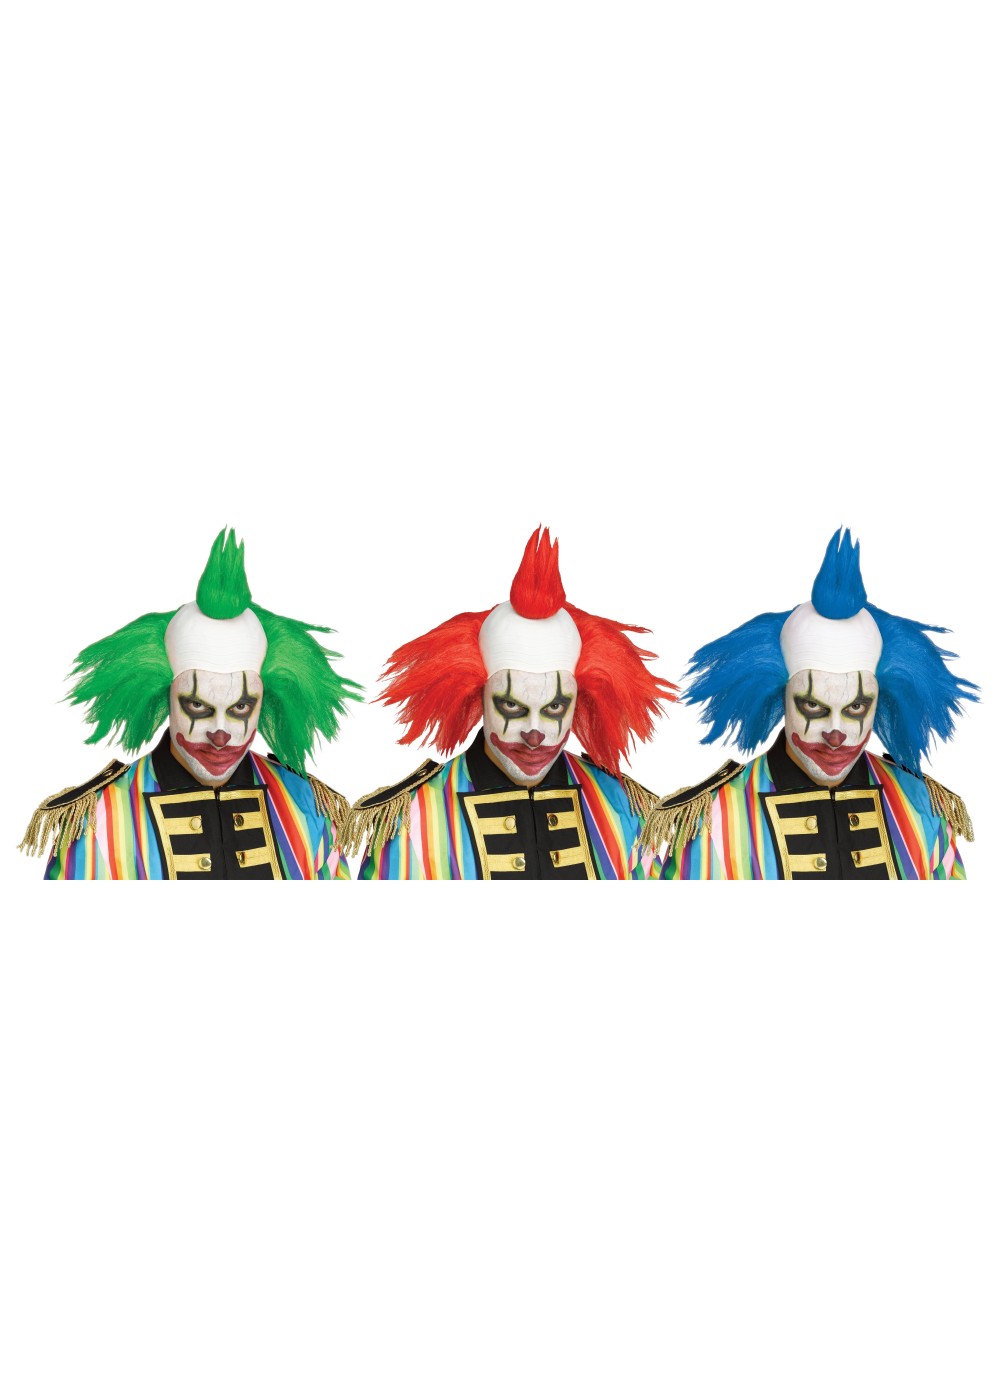 Scary Clown Wig